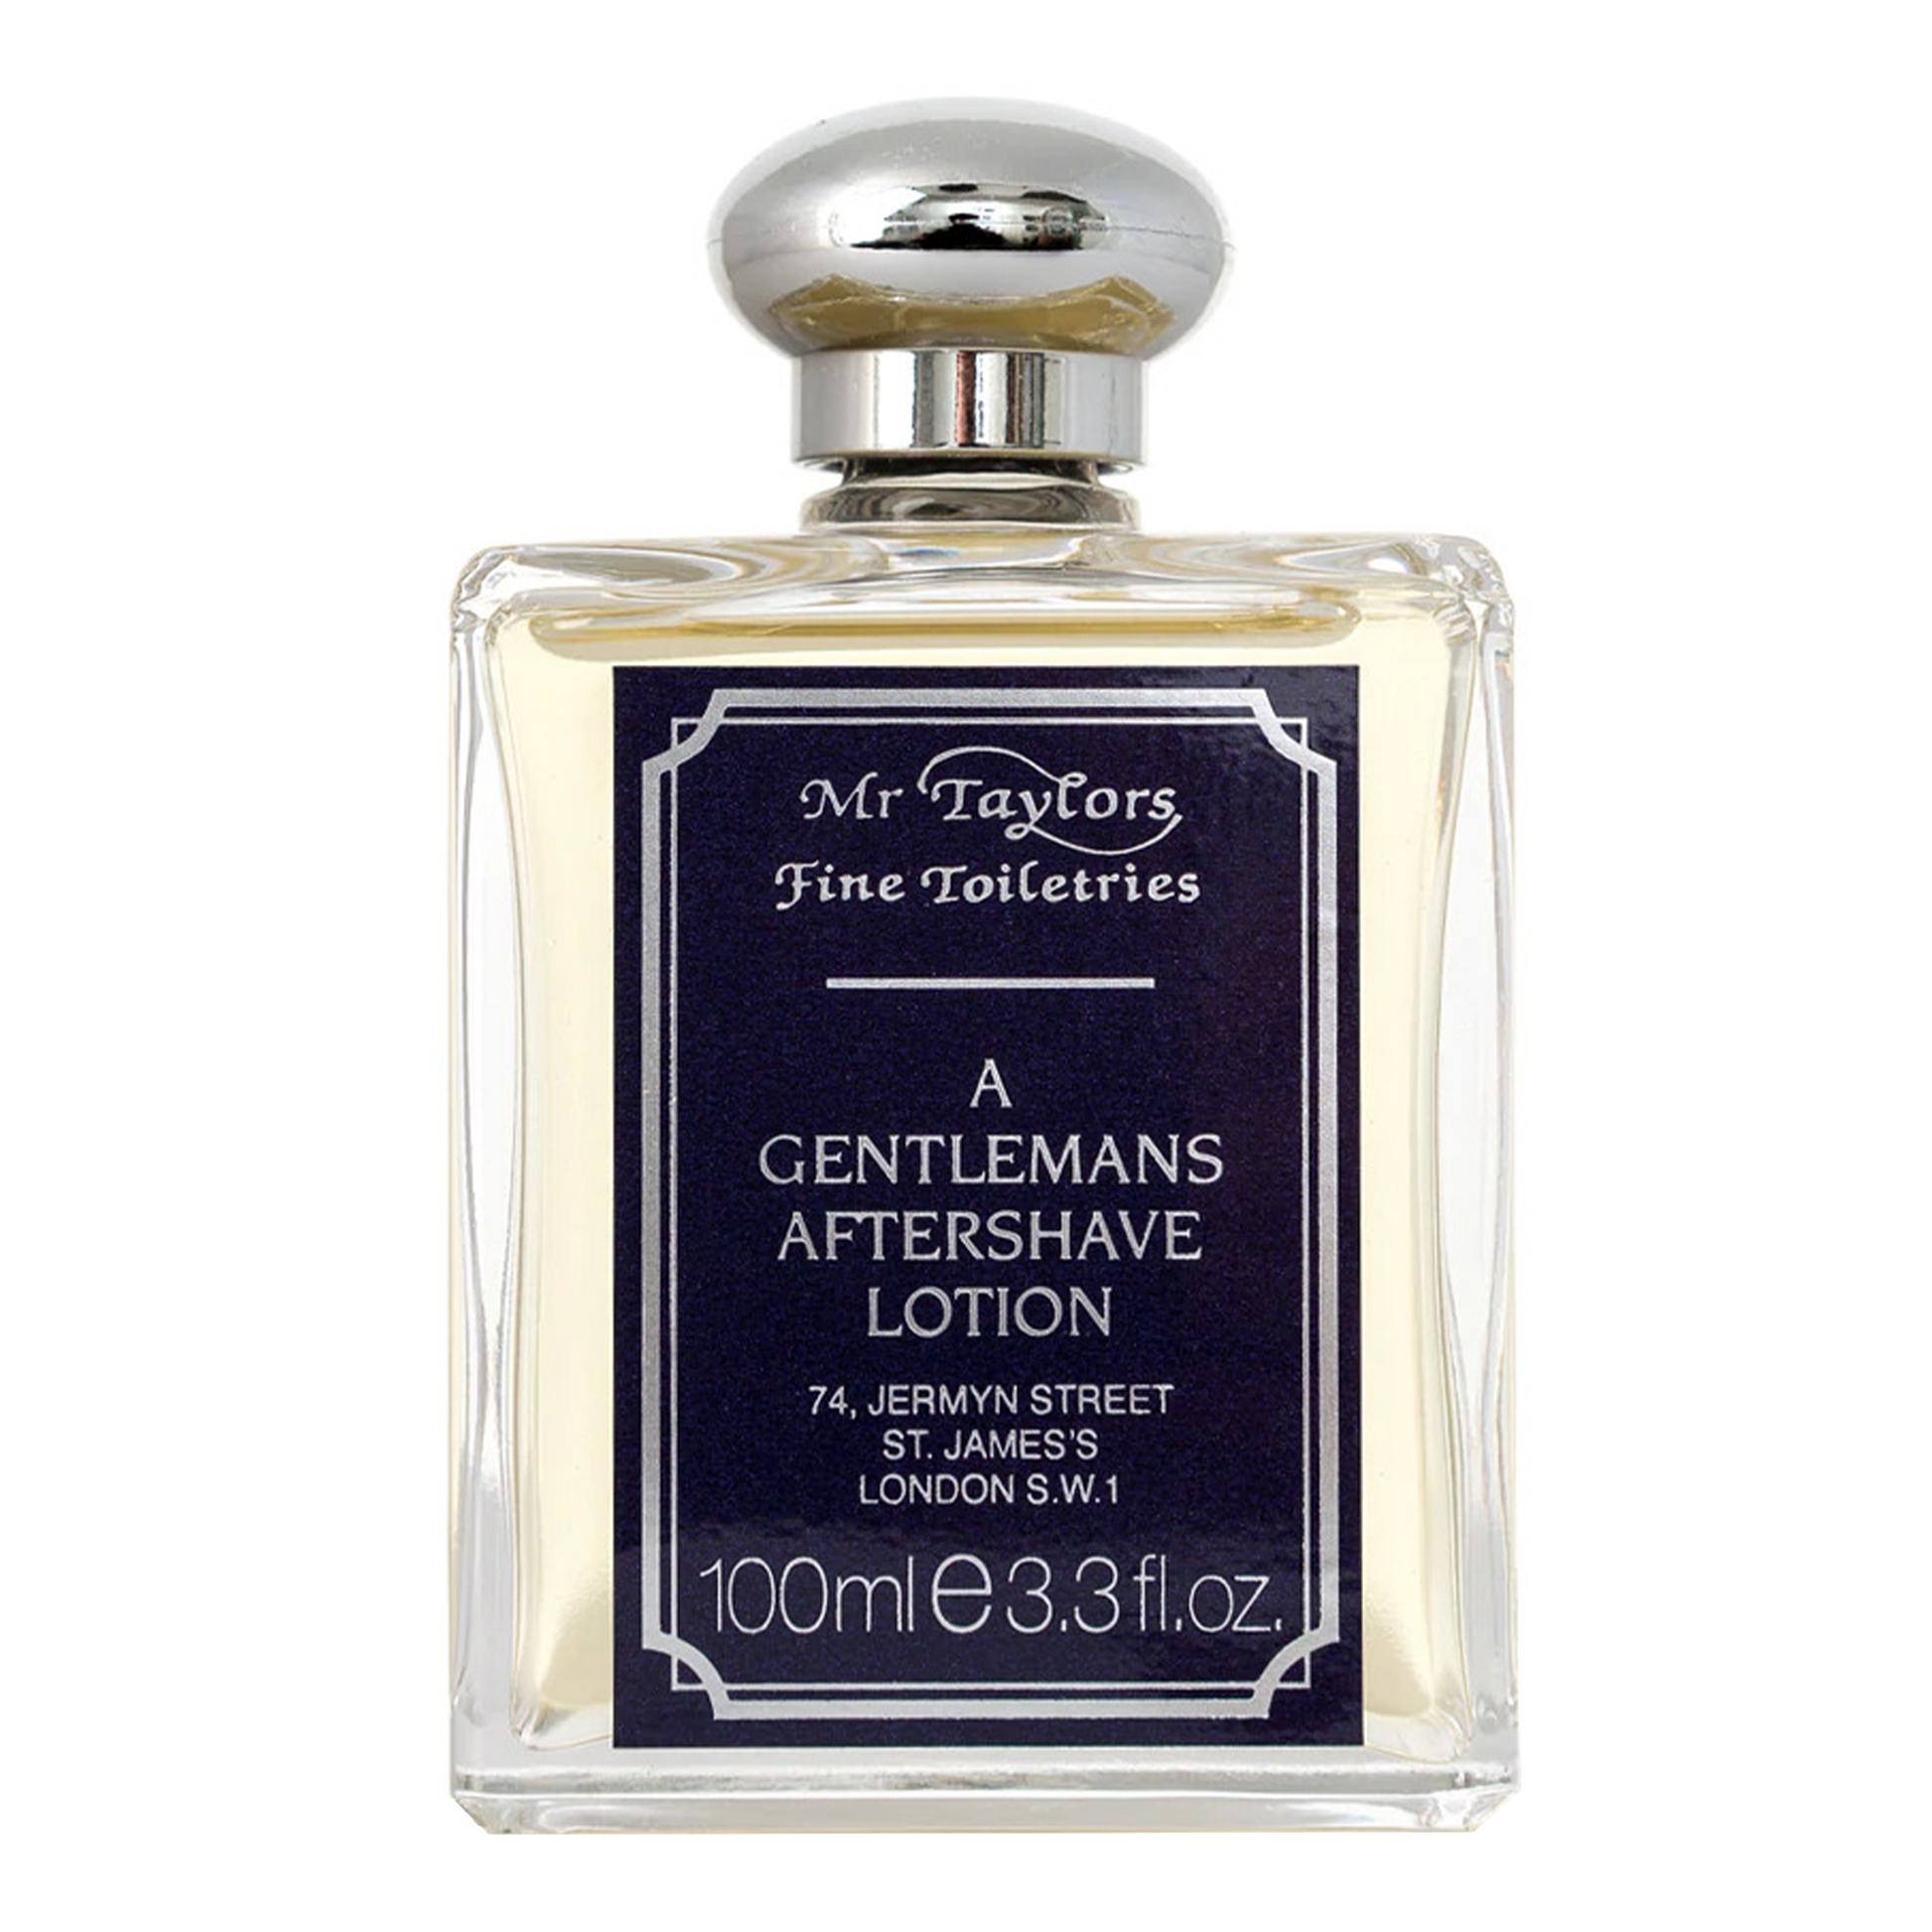 Taylor of Old Bond Street Mr Taylor Aftershave Lotion: A fresh and beautifully fragranced splash-on aftershave rich in the historical Taylor tradition.  Fragrances Notes • TOP: Lavender, Bergamot, Green Notes, Fougere • HEART: Geranium, Soft Green Fern • BASE: Amber, Leather, Moss, Musk